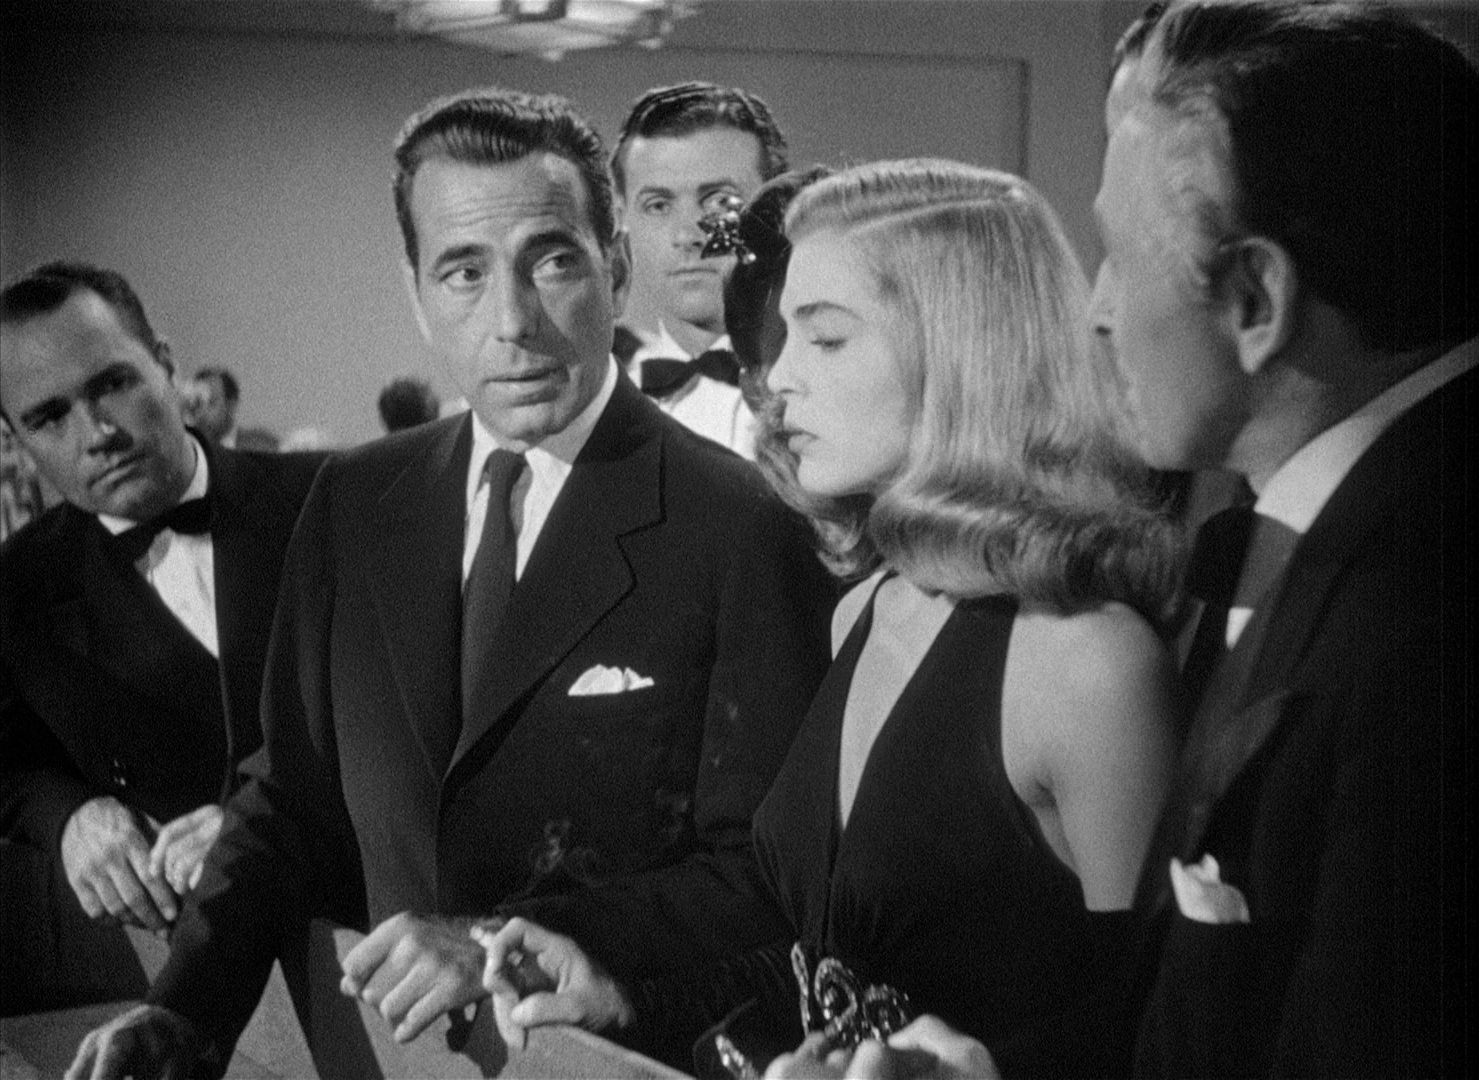 Black-and-white scene: Humphrey Bogart at the gambling table, attentively observing a man in the foreground, next to Lizabeth Scott, all dressed in evening wear.